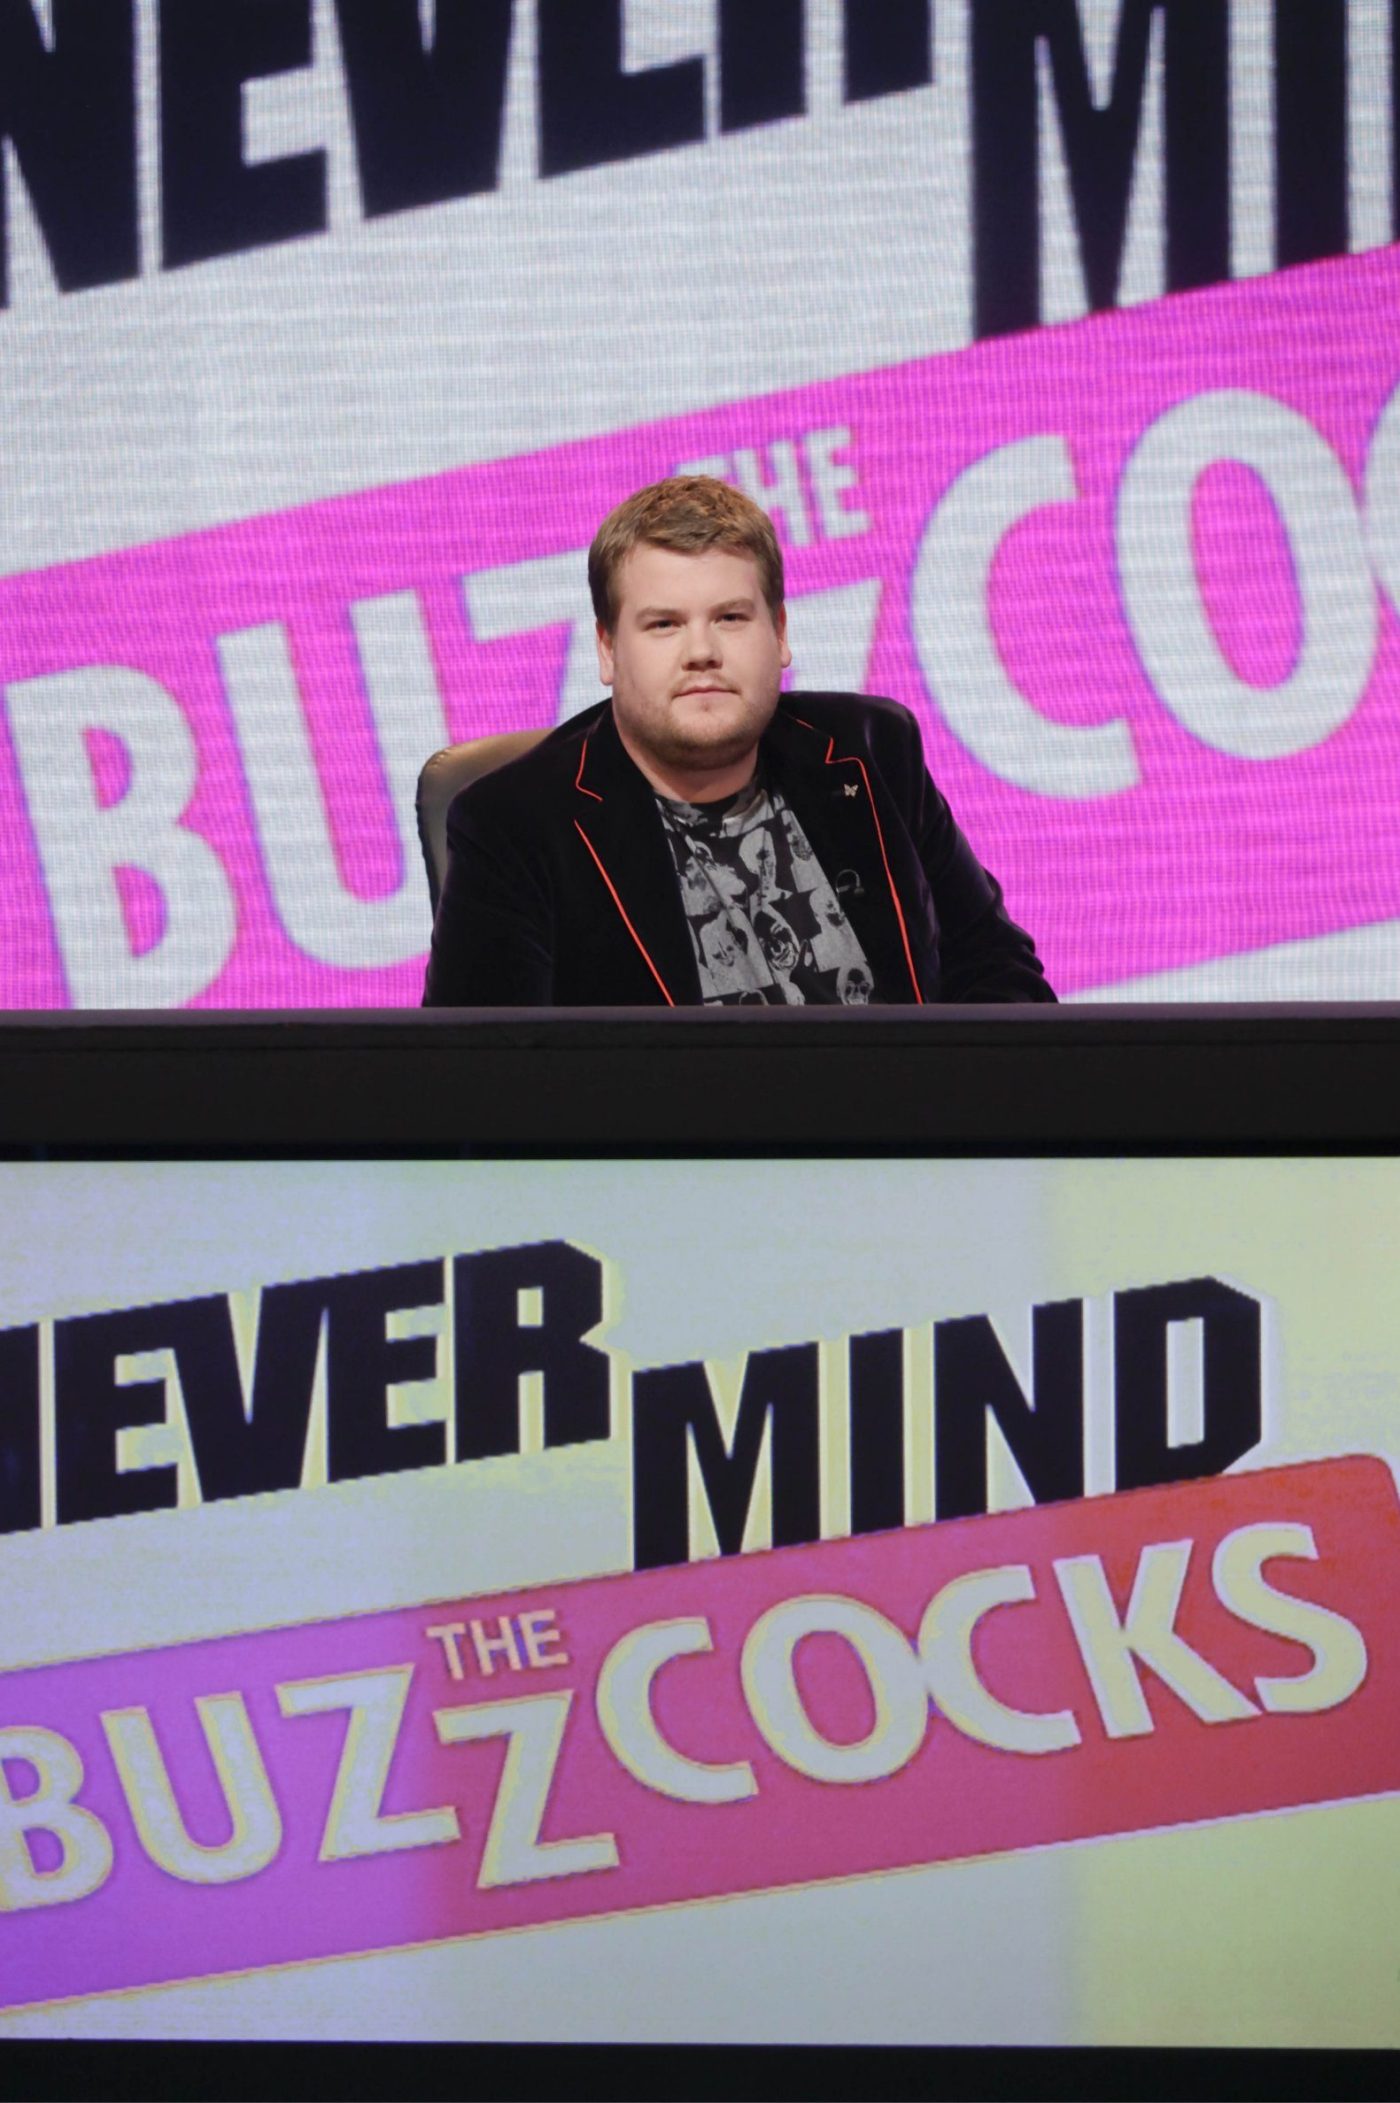 Editorial use only Mandatory Credit: Photo by Brian J Ritchie/Talkback Thames/Shutterstock (1009350ap) James Corden 'Never Mind the Buzzcocks' TV Programme, London, Britain. - Sep 2009